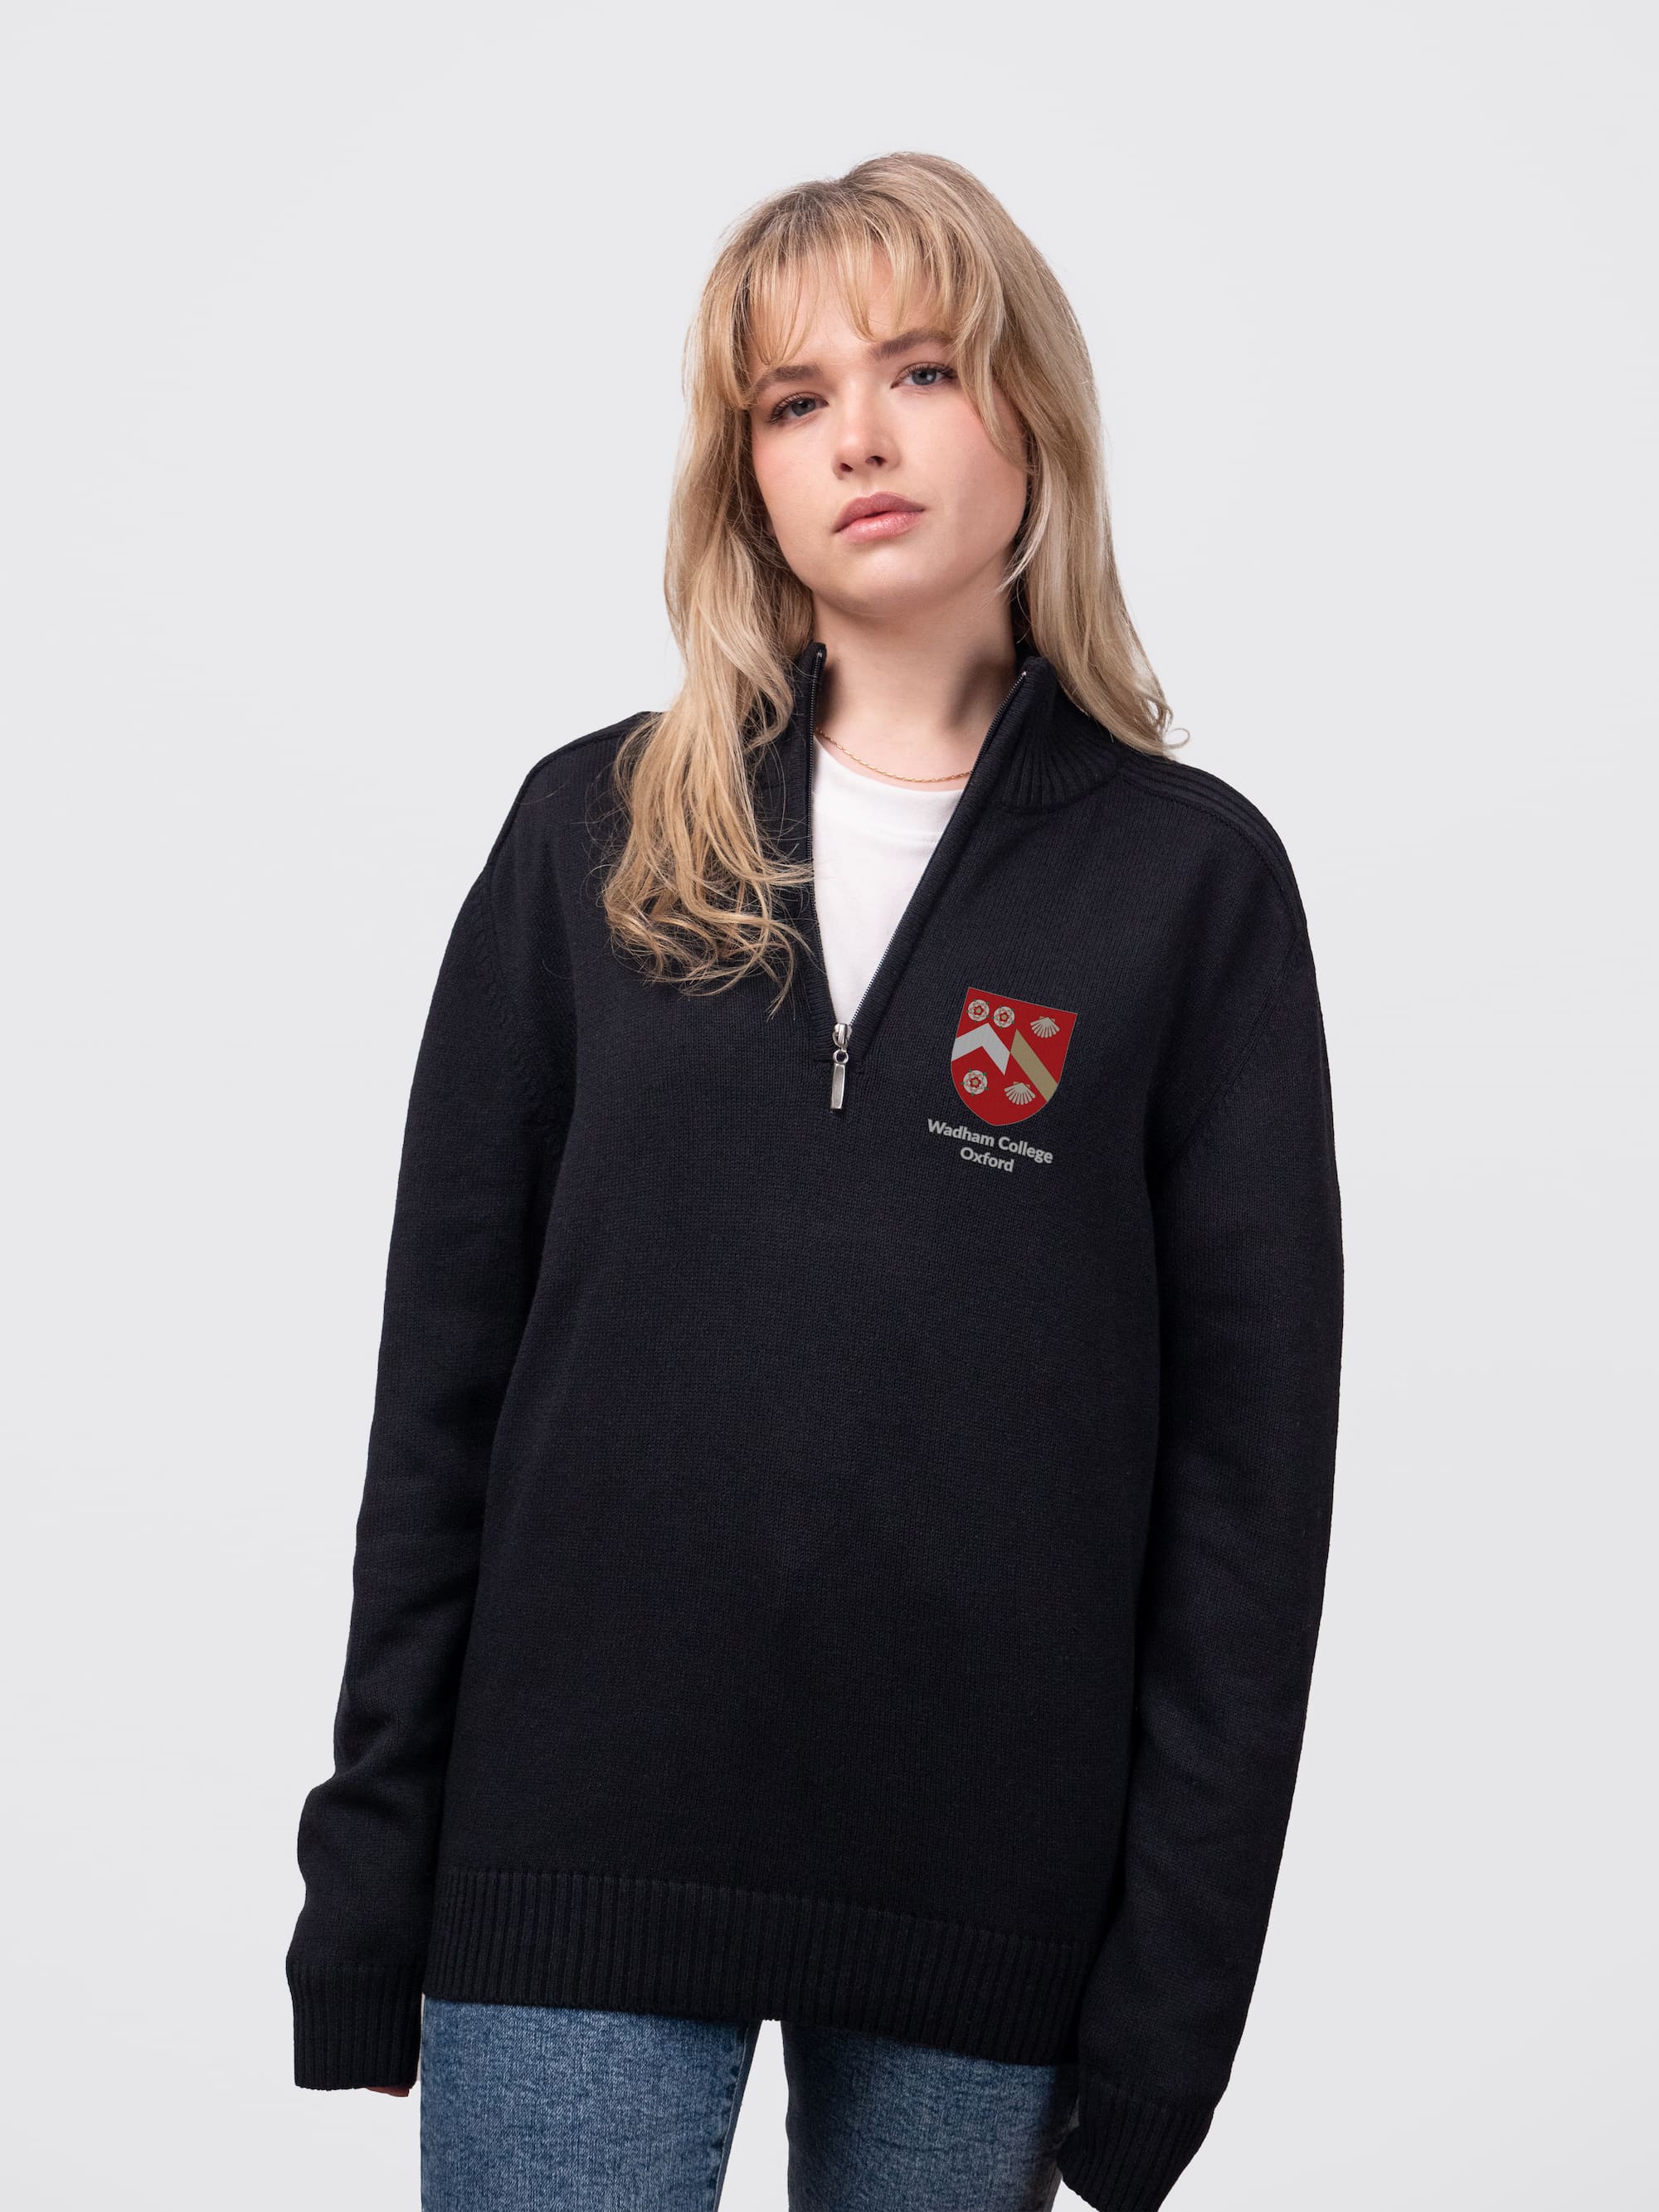 Stylish zip-neck sweater with custom left-breast embroidery